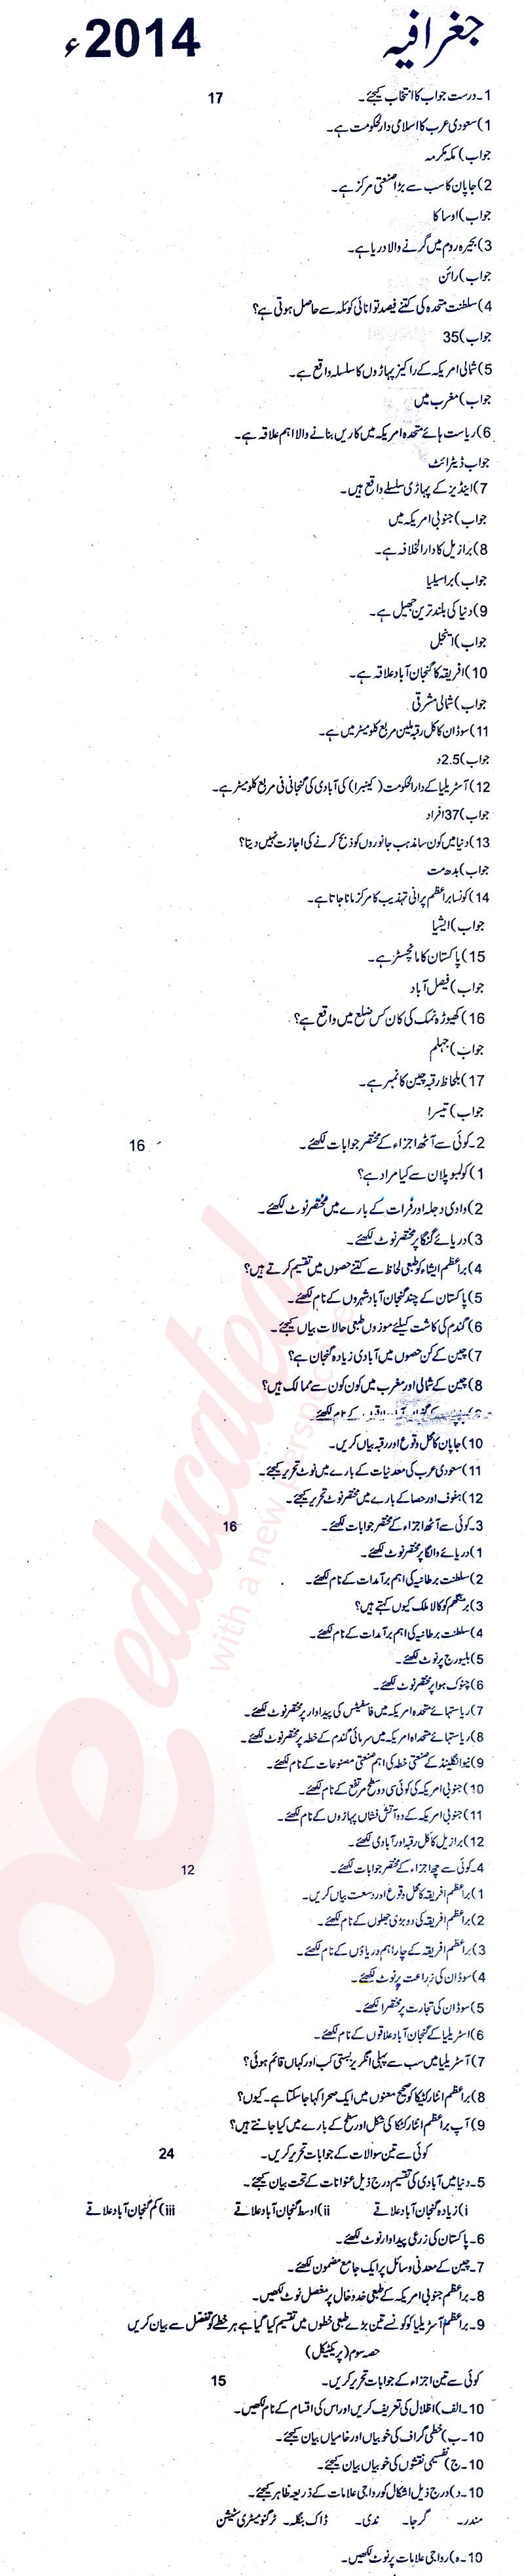 Commercial Geography FA Part 2 Past Paper Group 1 BISE Rawalpindi 2014